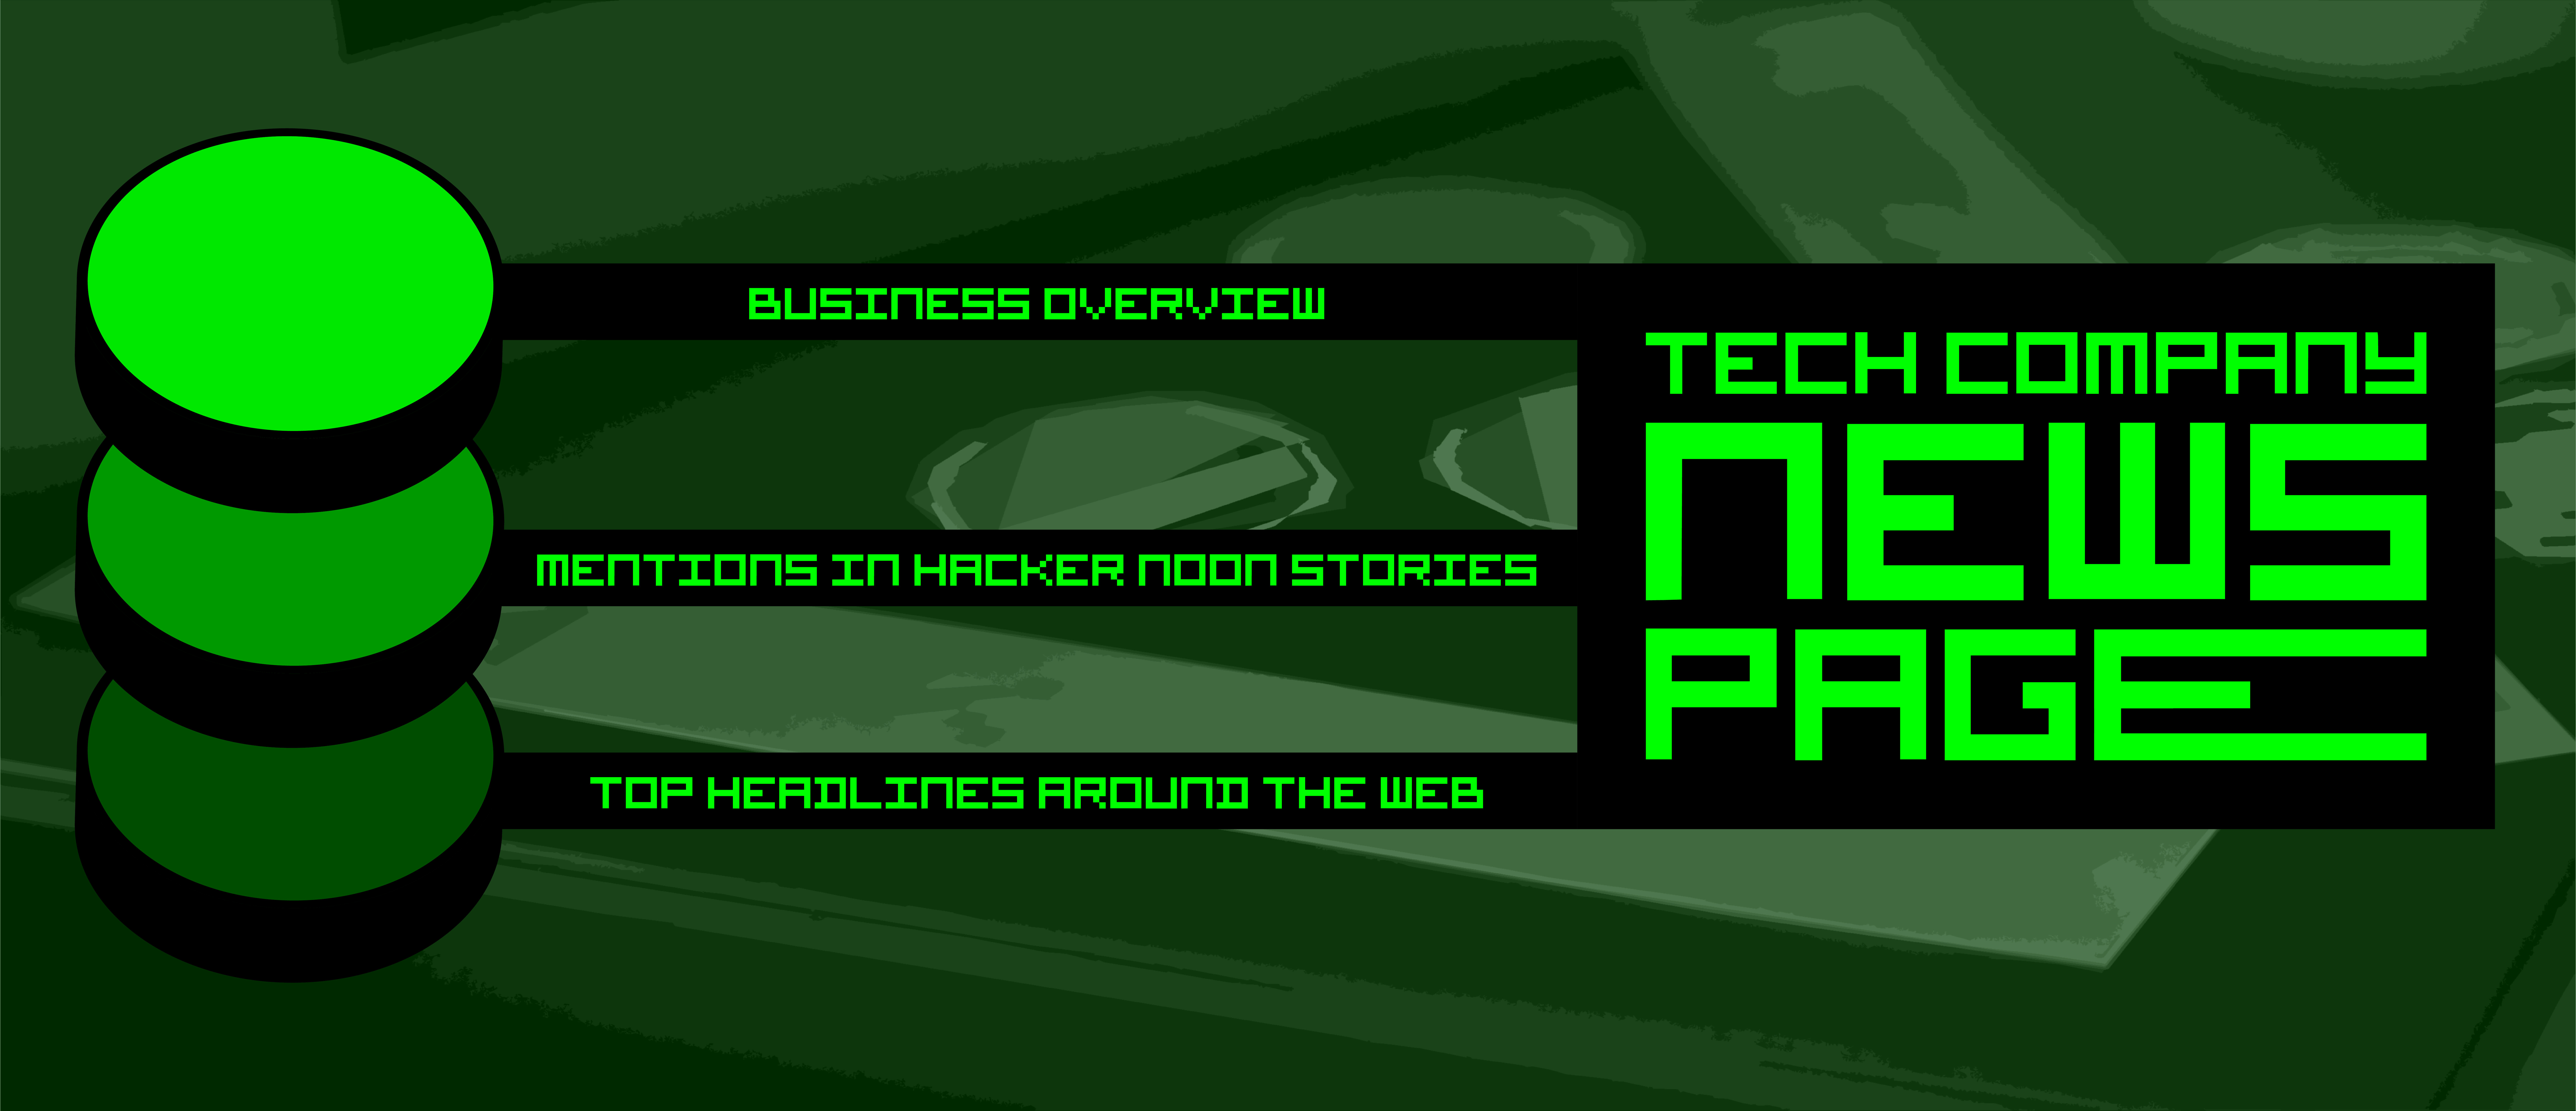 /about-tech-company-news-pages-by-hacker-noon-uwu34bh feature image